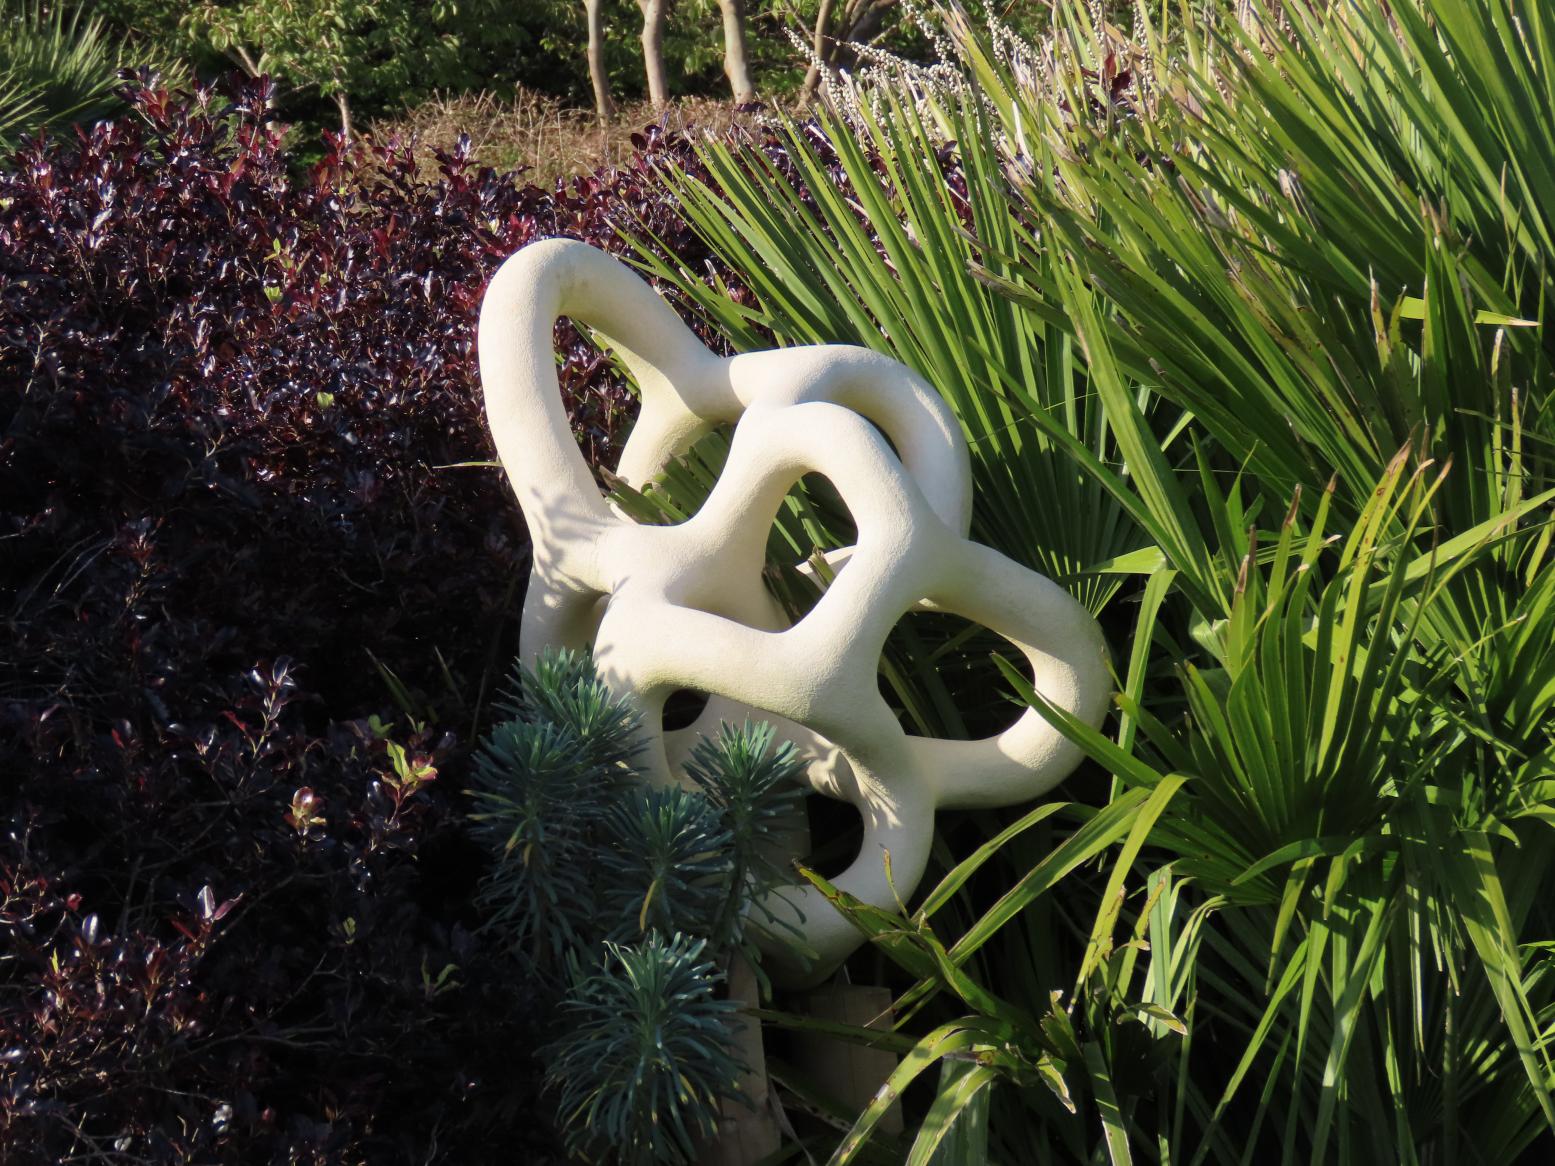 Open Form 2 by Isla Chaney, part of the Sculpture Trail in Langmoor Gardens, Lyme Regis